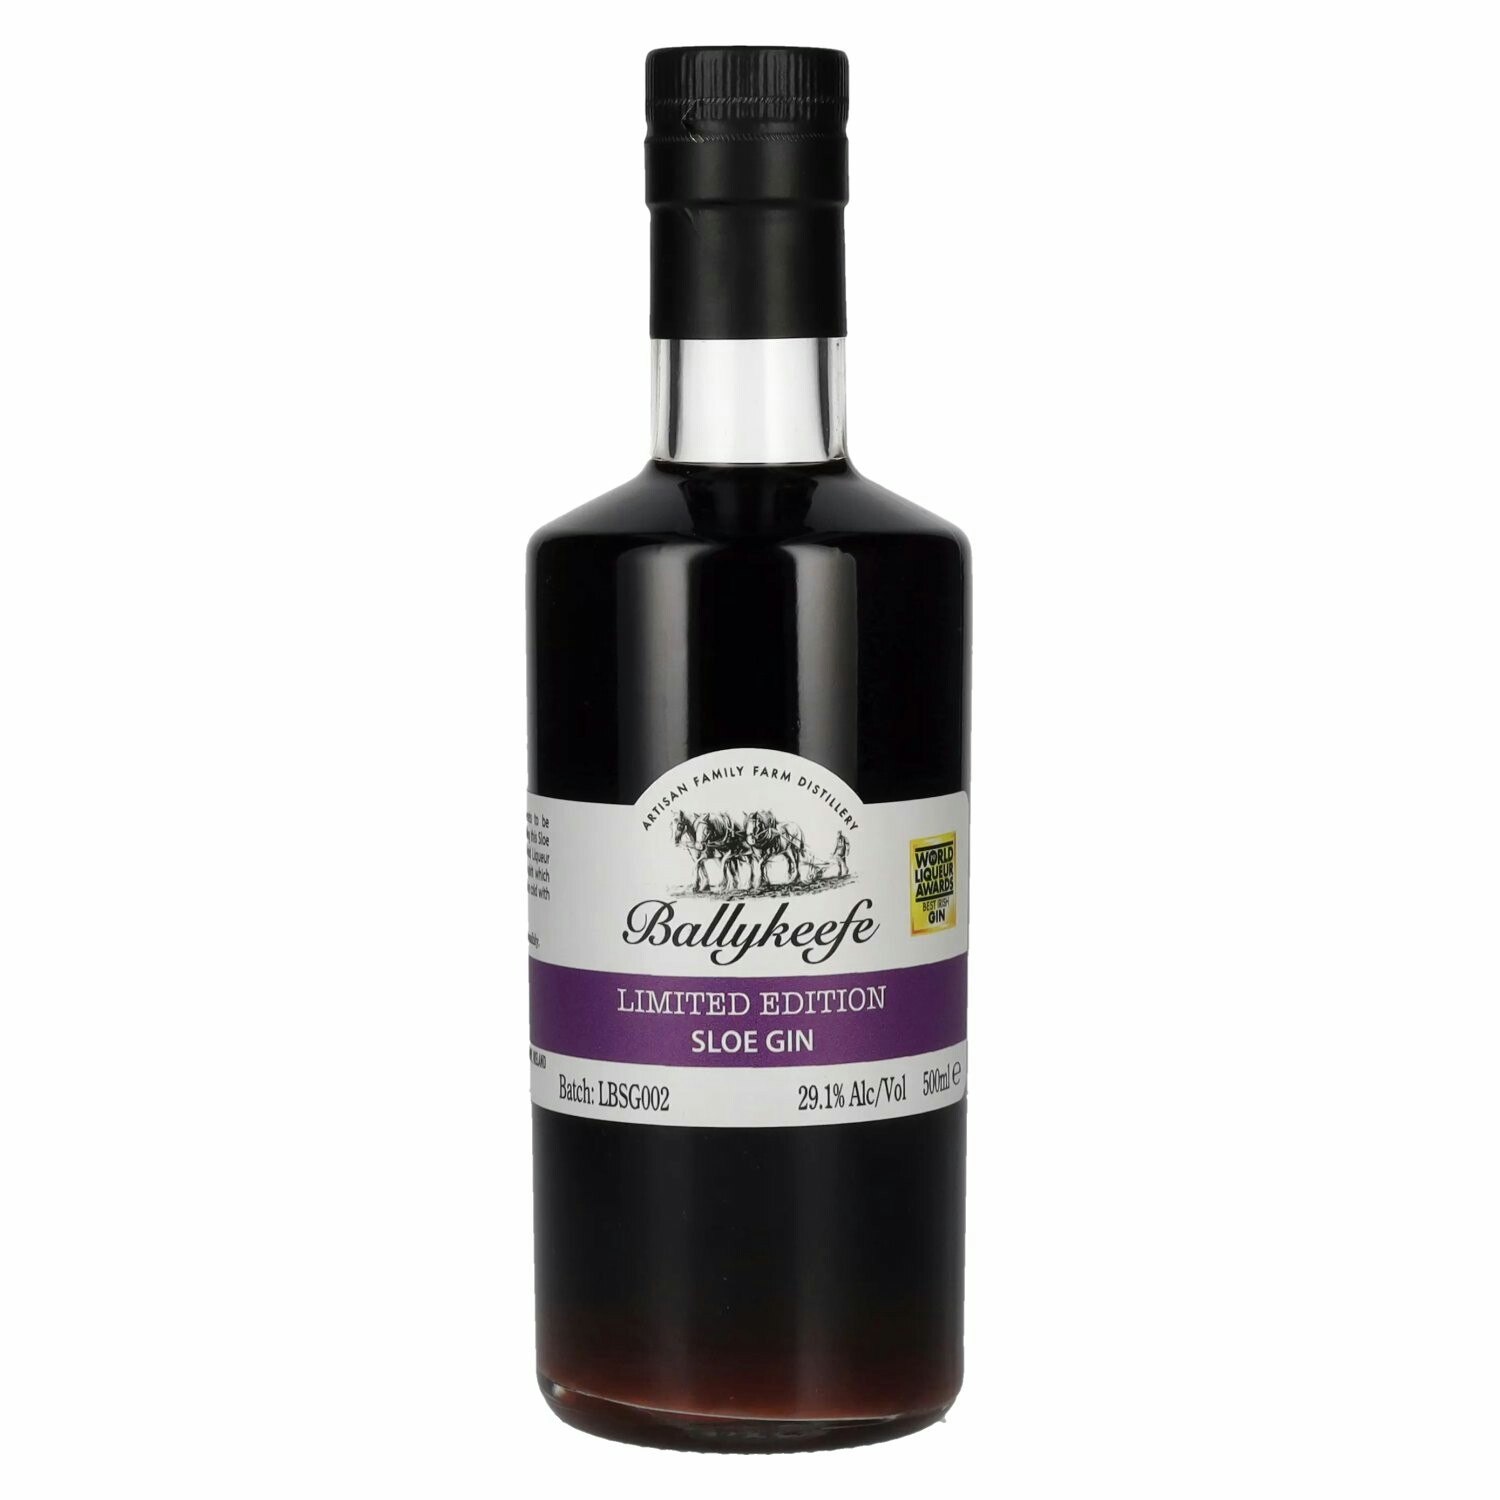 Ballykeefe Sloe Gin Limited Edition 29,1% Vol. 0,5l